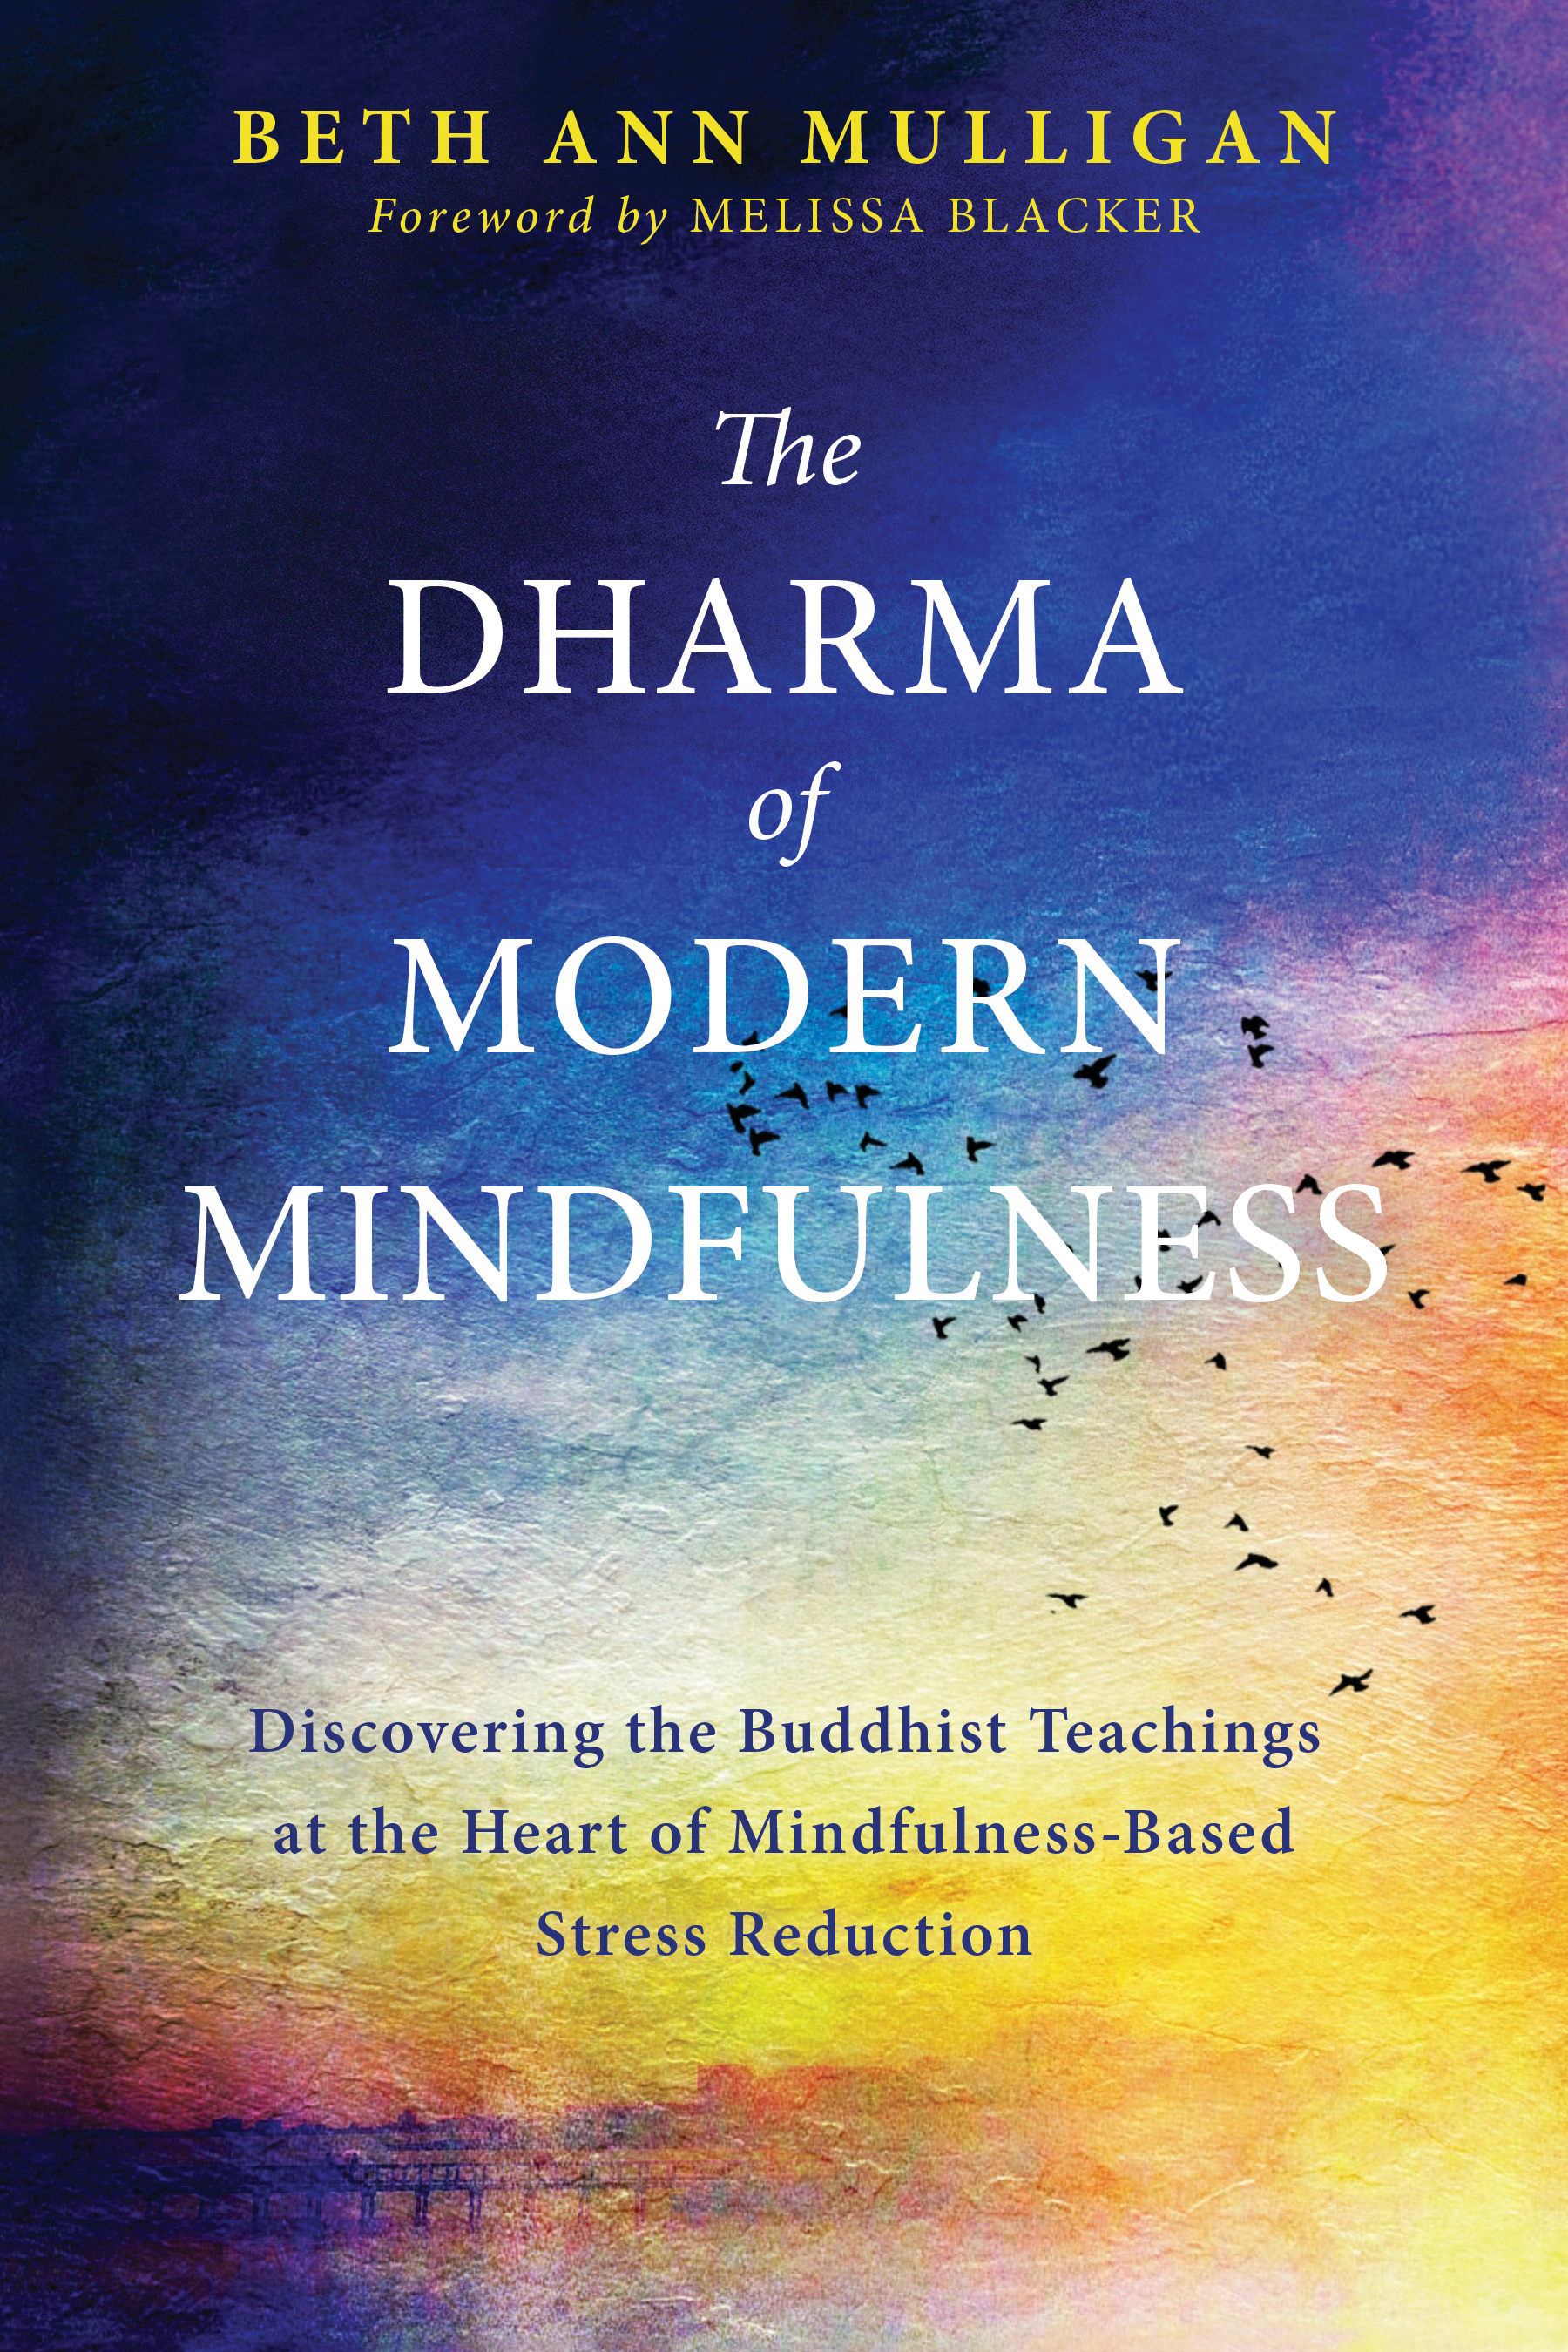 Image de couverture de The Dharma of Modern Mindfulness [electronic resource] : Discovering the Buddhist Teachings at the Heart of Mindfulness-Based Stress Reduction